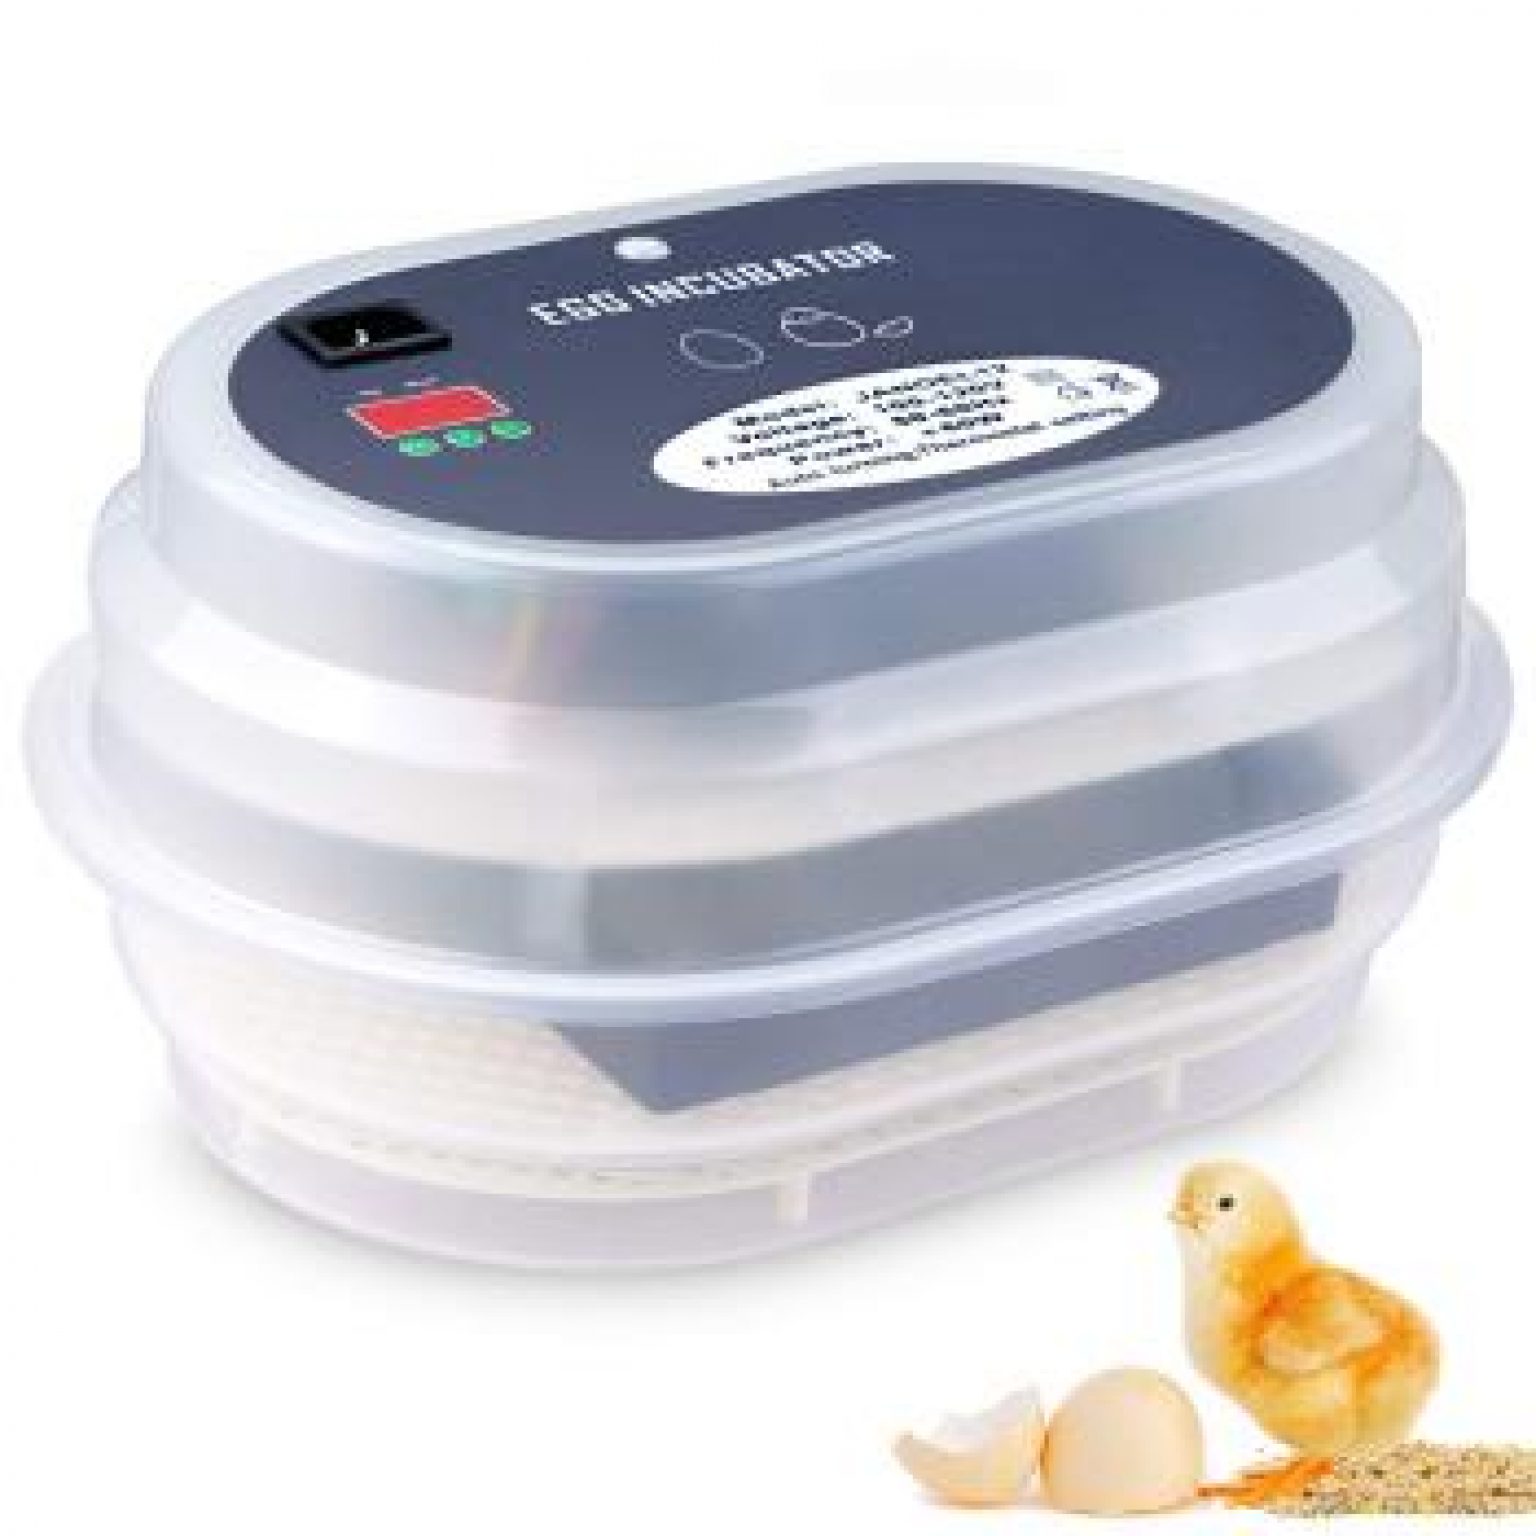 buying an incubator for eggs